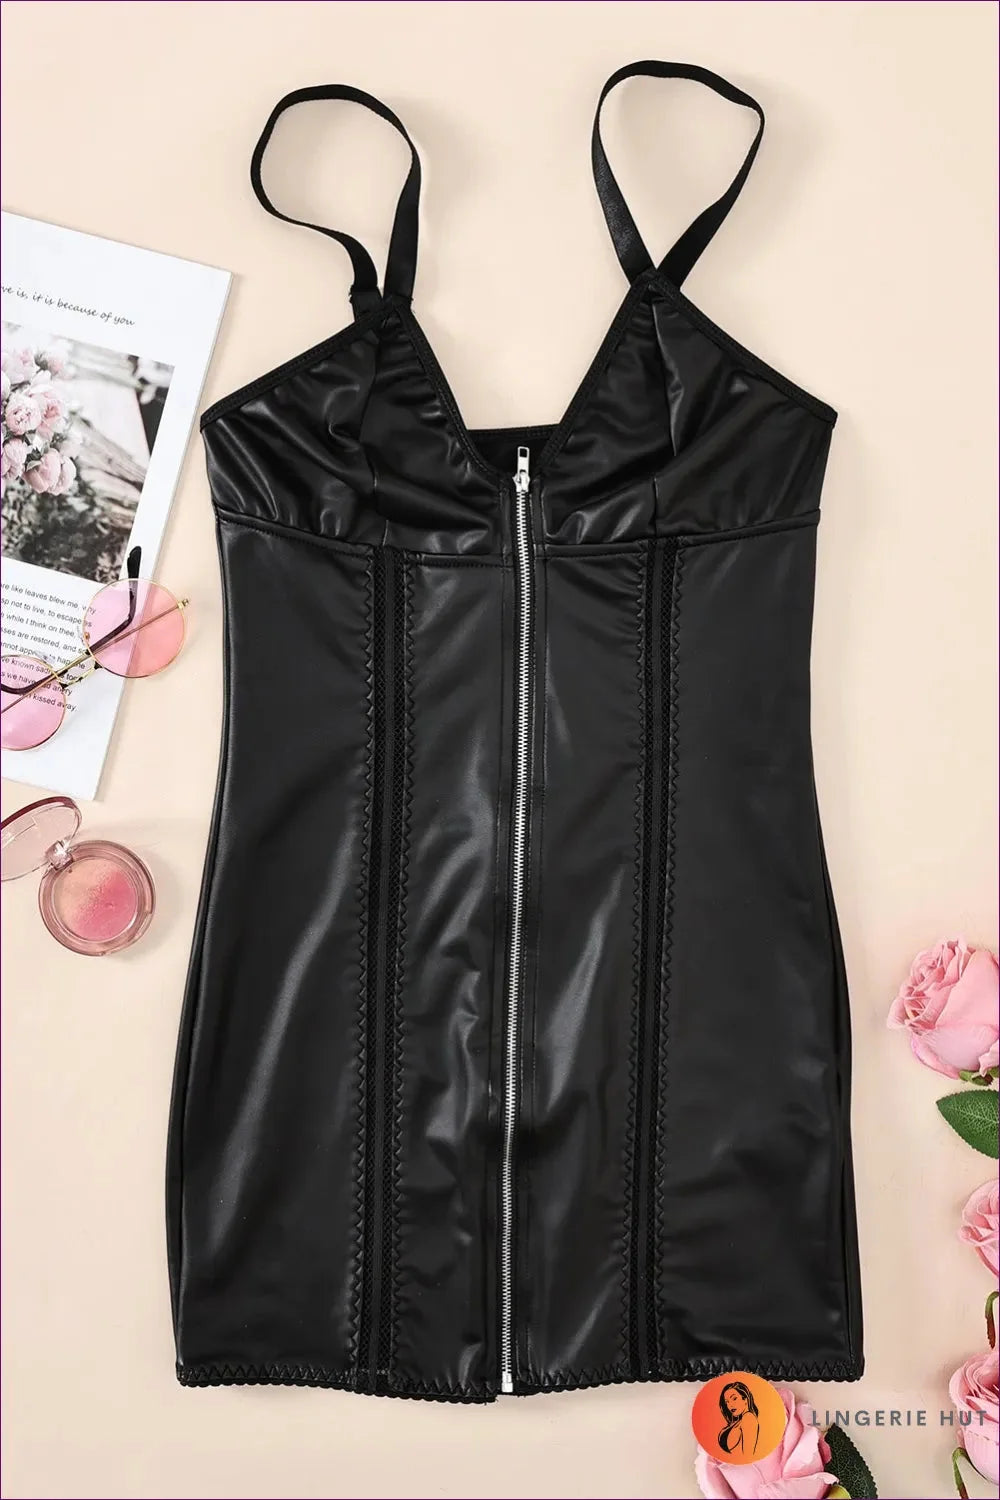 Step Into The Spotlight With Lingerie Hut’s V-neck Faux Leather Cami Dress. Zipper Detail, Sleek Fit,